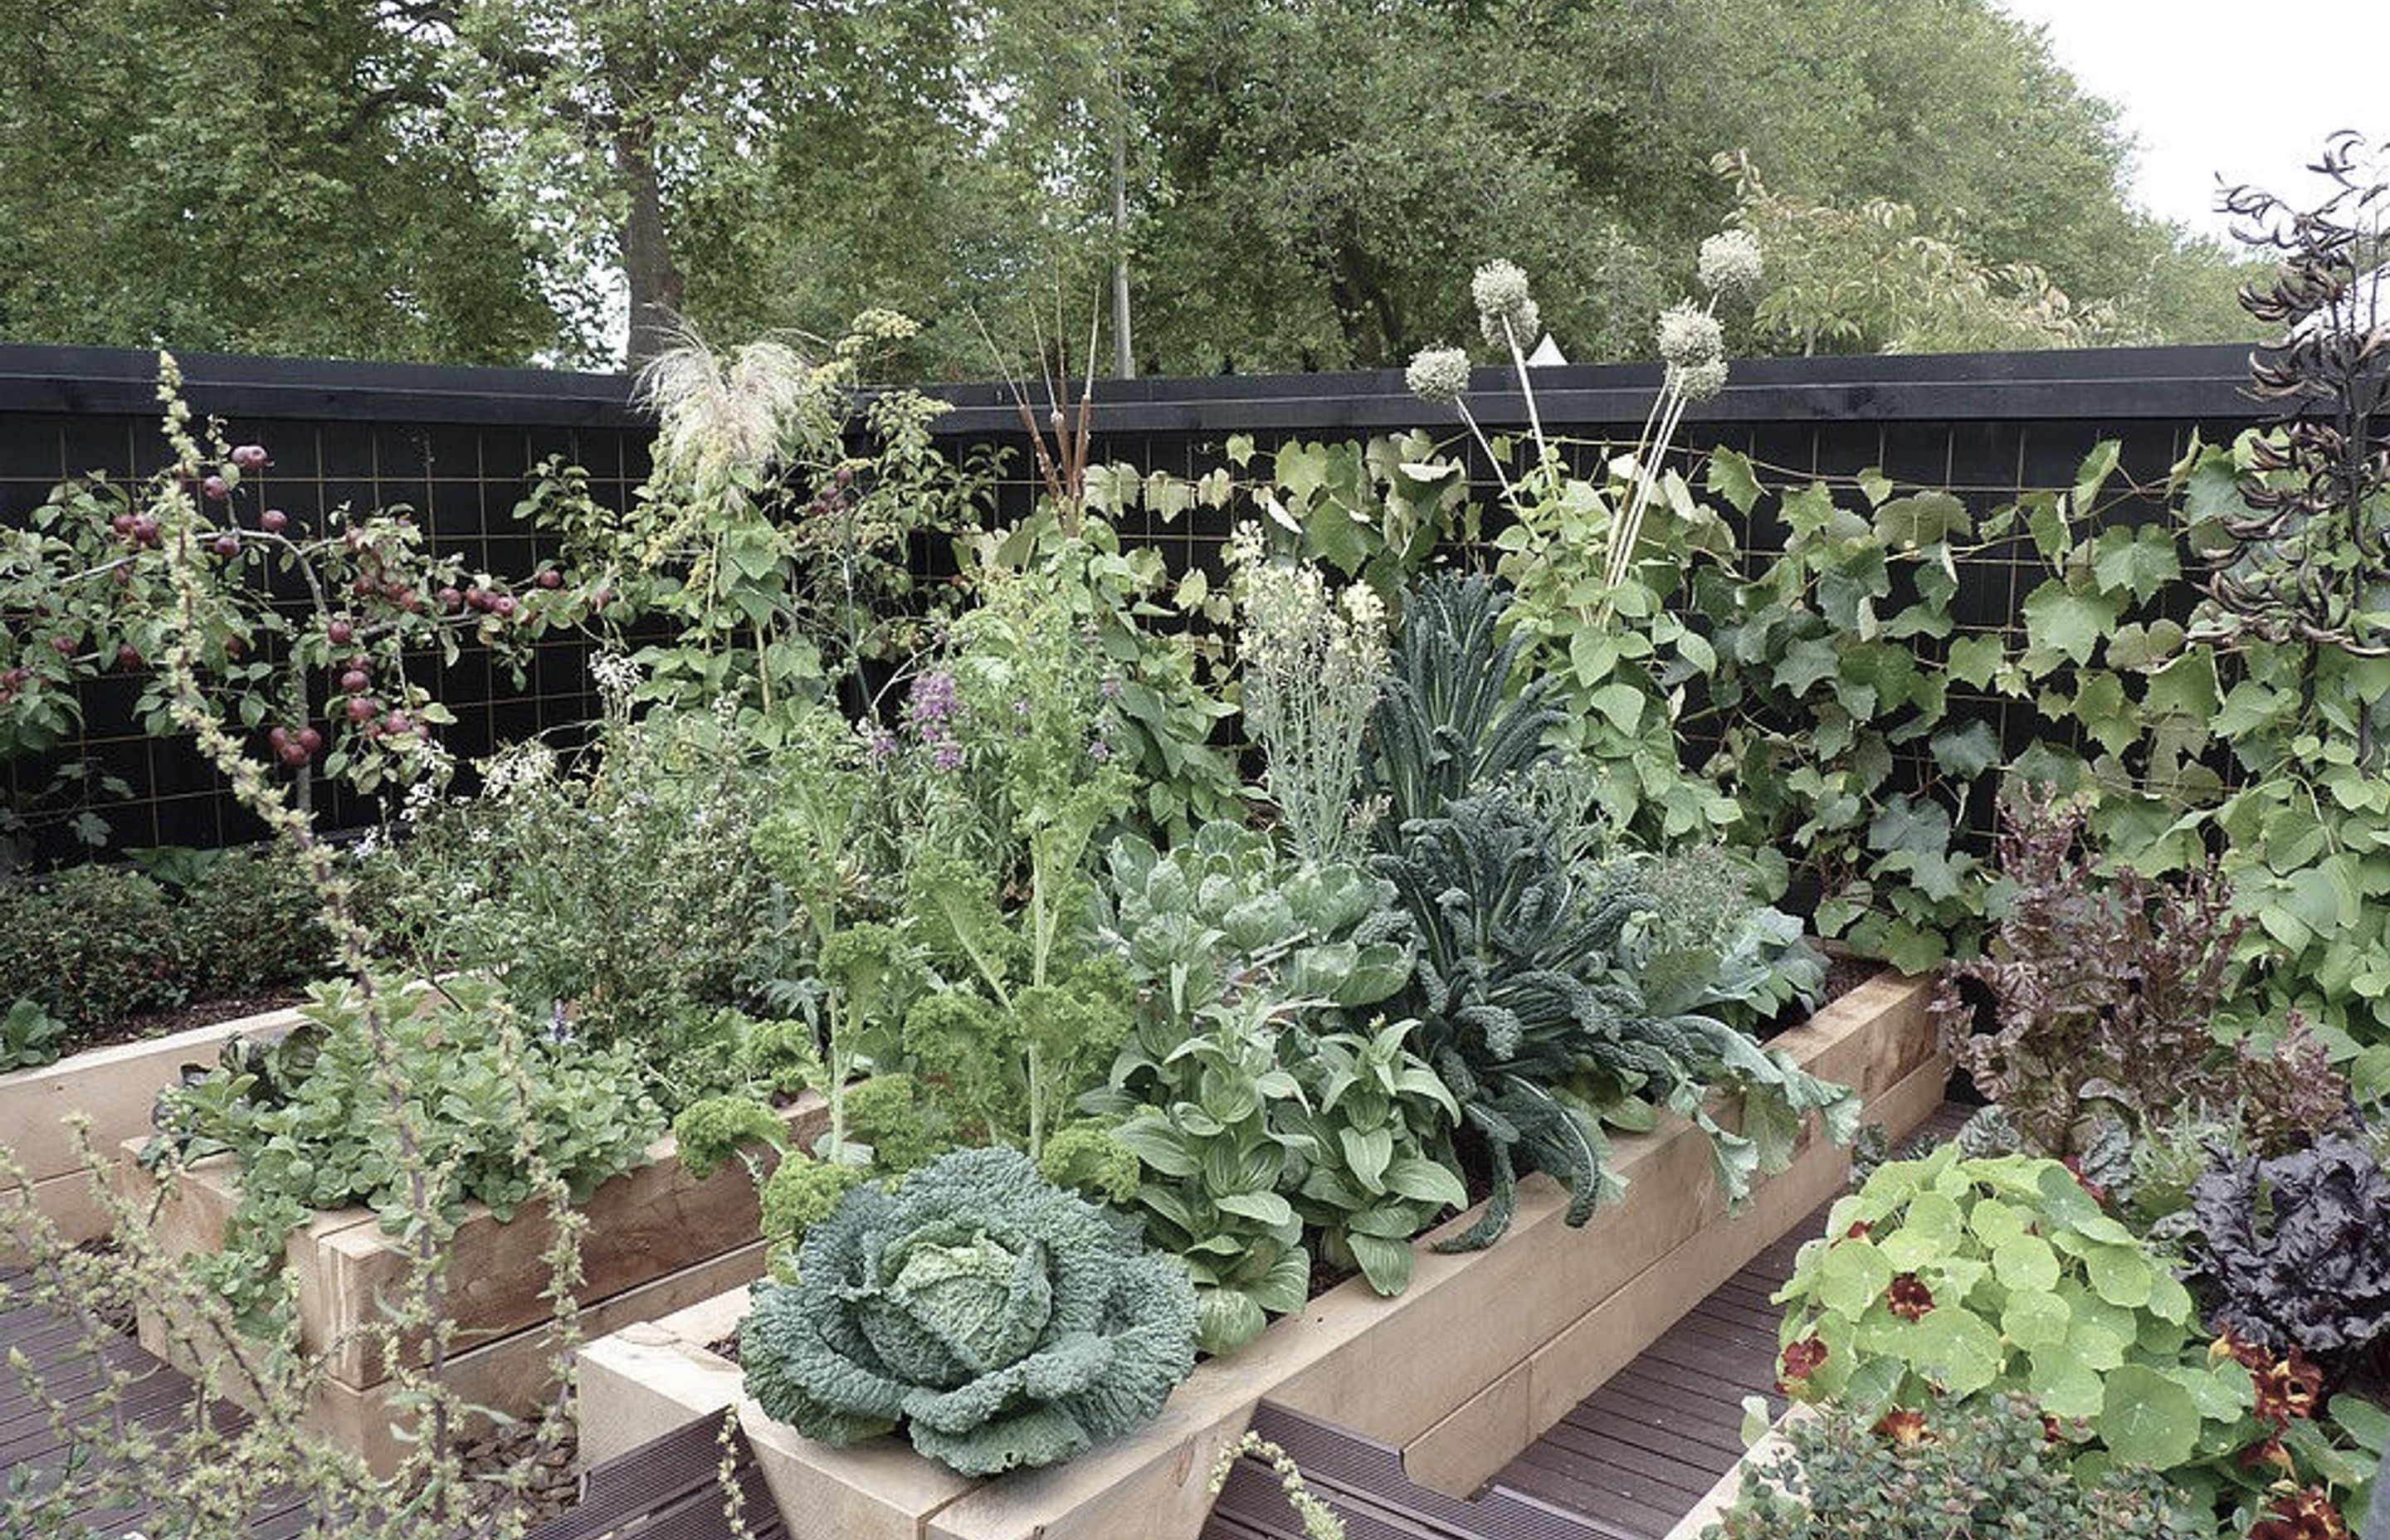 The garden follows sustainable &amp; organic bast practices eg planting in families and rotating beds, insterspersed with companion planting to combat insects &amp; diseases.